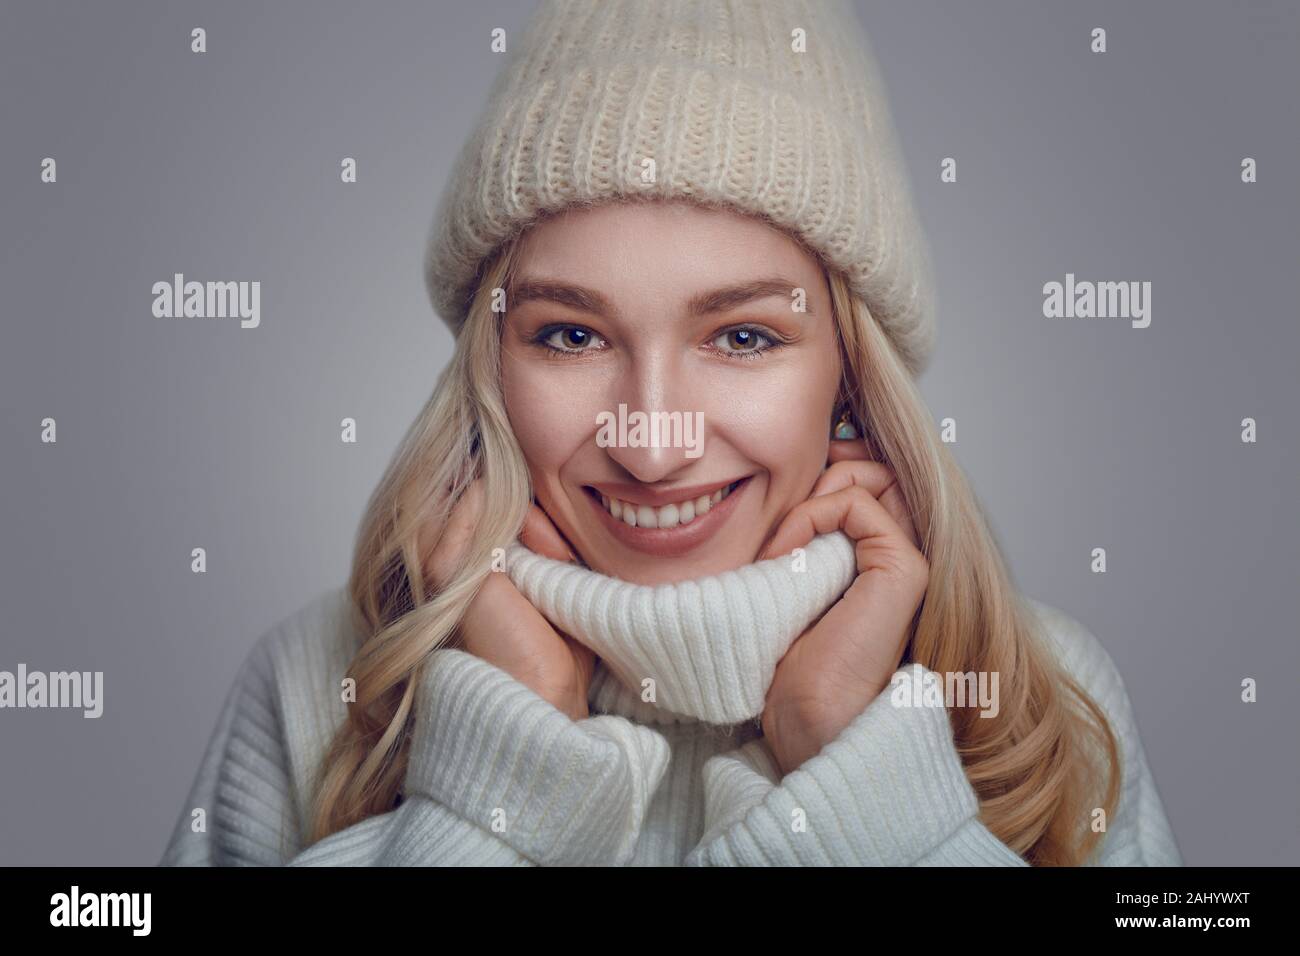 Attractive blond woman in a warm woollen polo neck sweater and knitted cap standing in front of a grey background snuggling into the collar with a wid Stock Photo